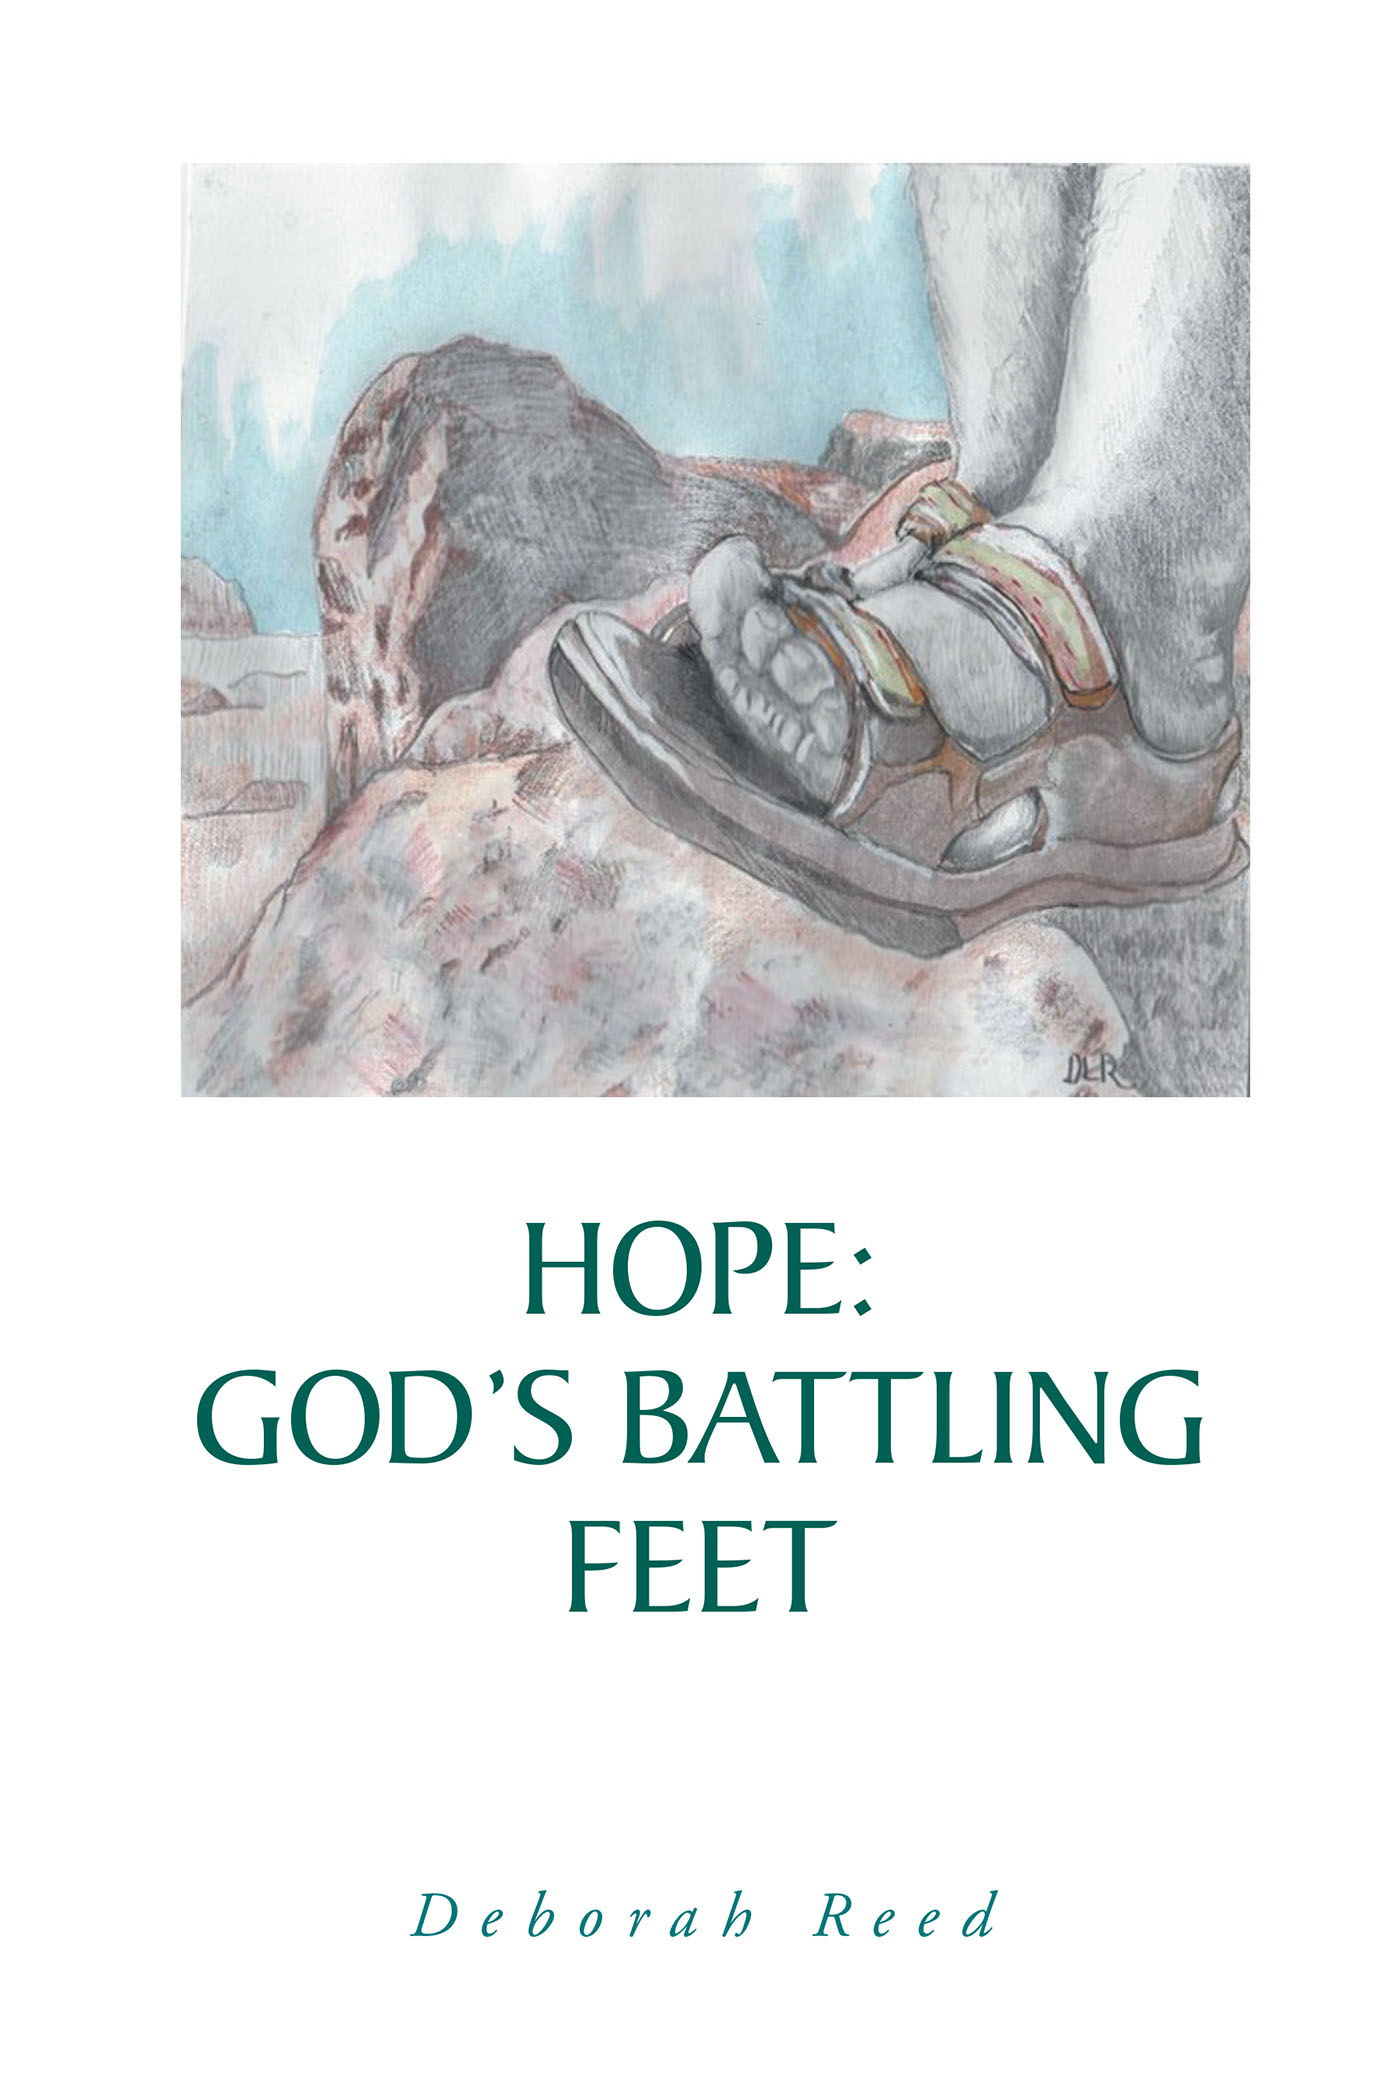 Deborah Reed’s Newly Released "Hope: God’s Battling Feet" is an Uplifting Devotional That Encourages Readers Through an Interactive Reading Experience